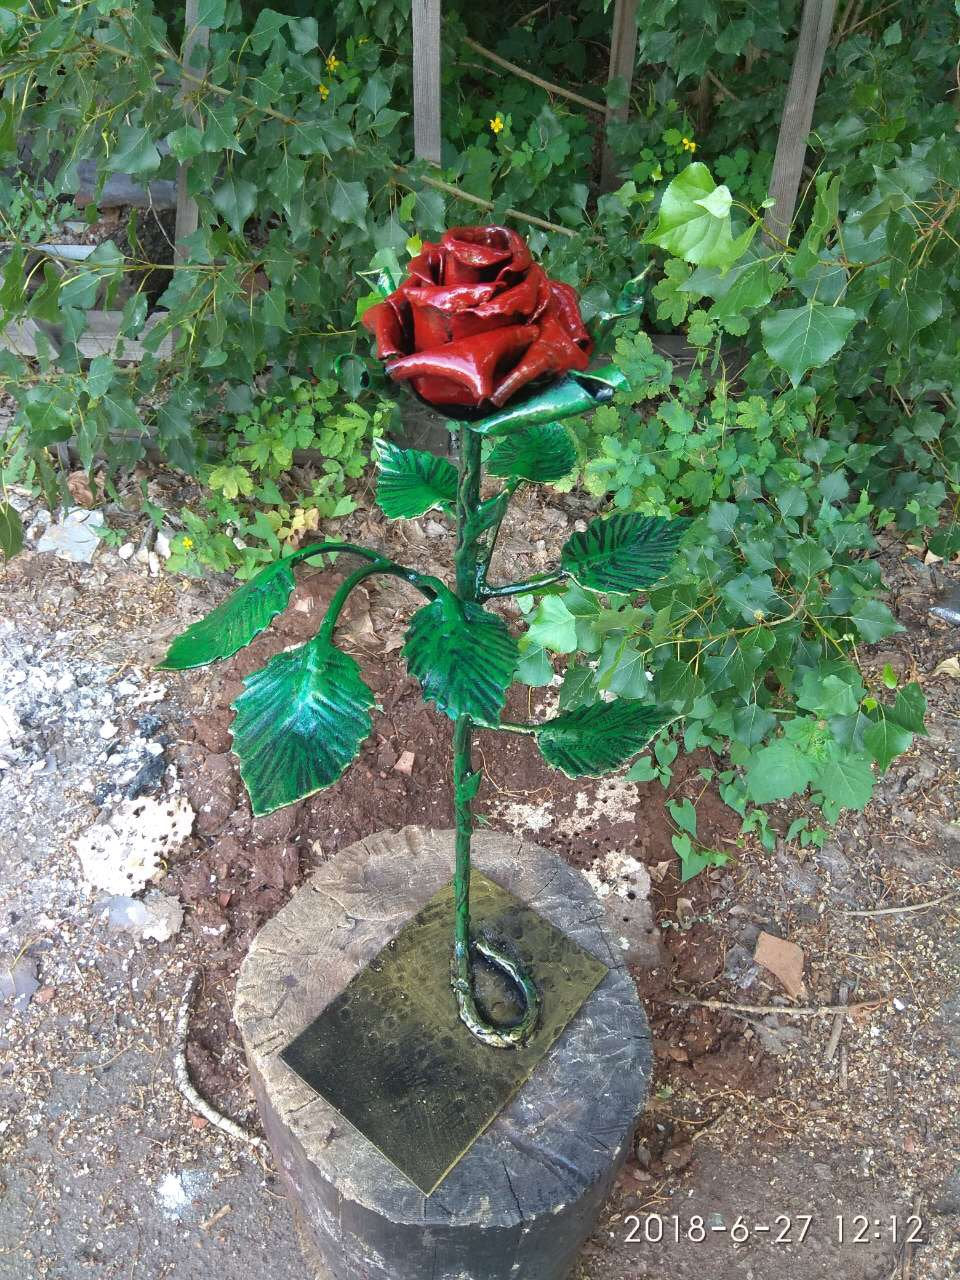 Iron anniversary, 6th anniversary, 6 year anniversary, engraved gift, personalized gift, iron rose, steel rose, metal rose, iron gift, rose